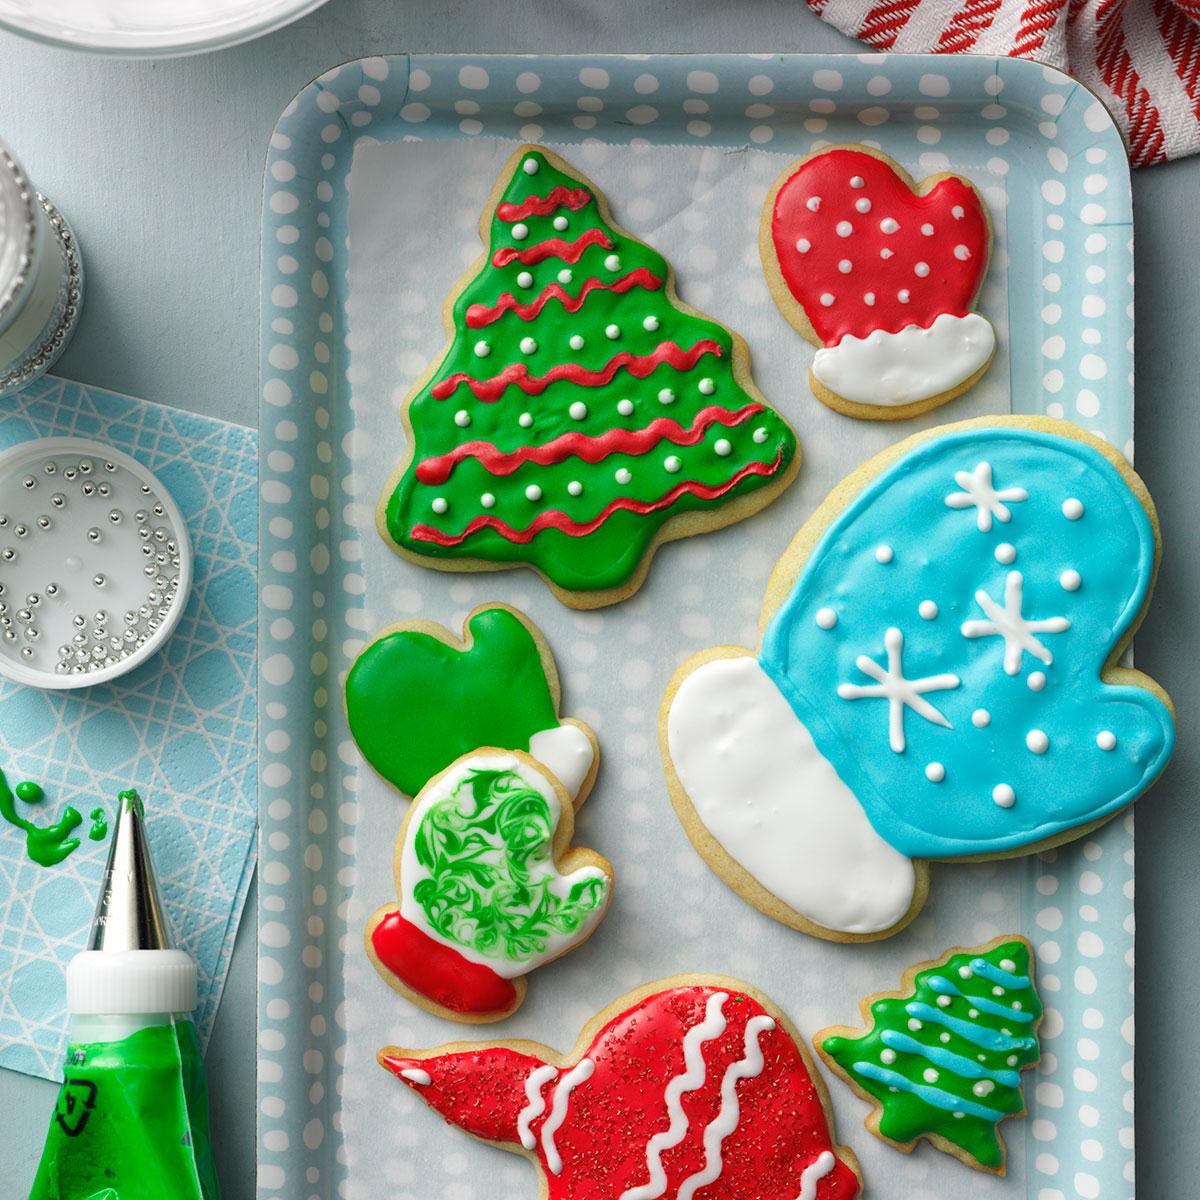 Decorated Christmas Cookies Recipes
 Holiday Cutout Cookies Recipe